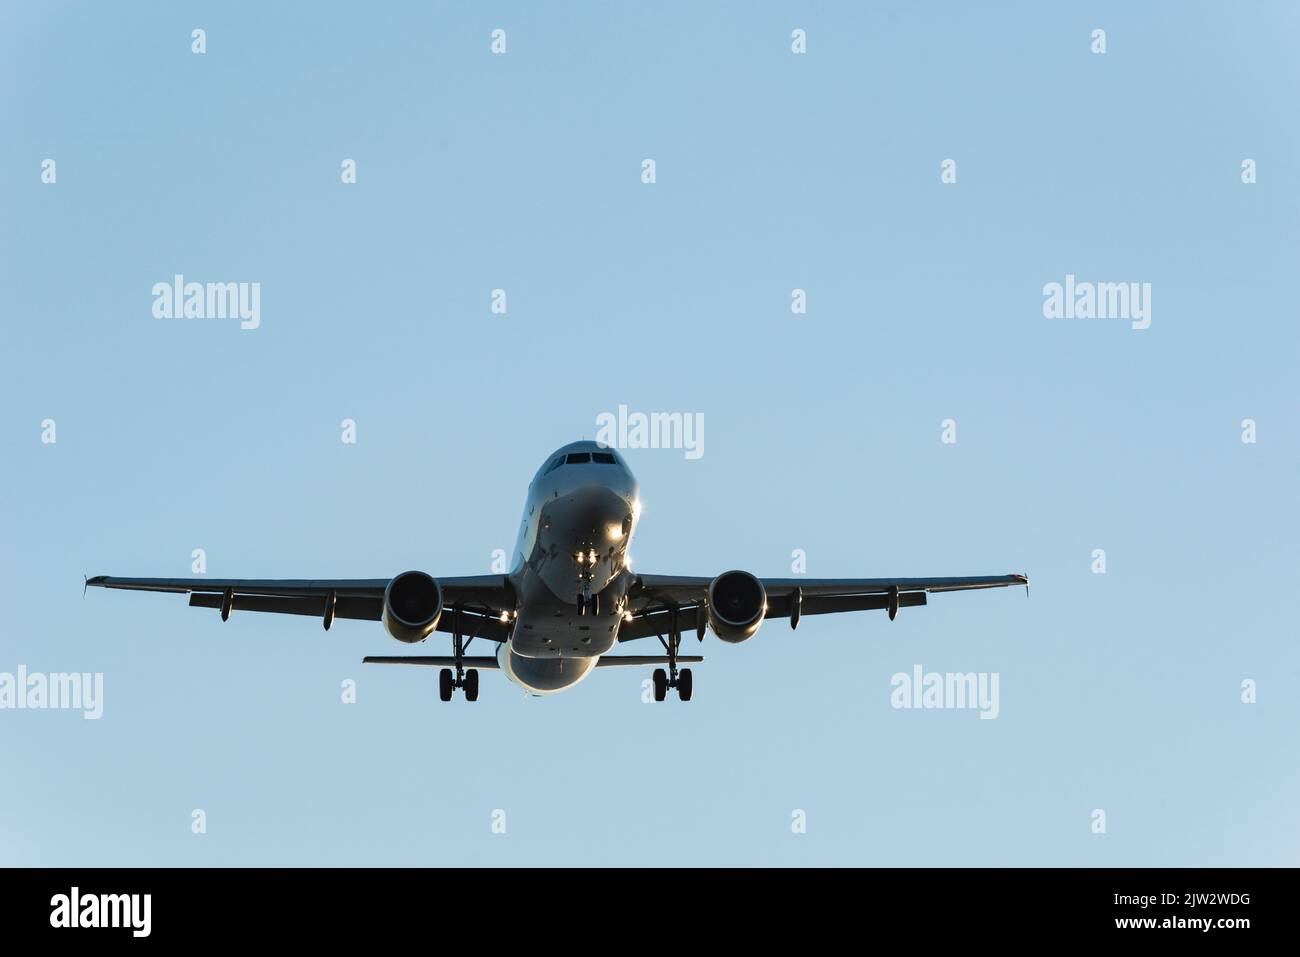 Passenger airplane on approach to the airport landing - stock photo Stock Photo